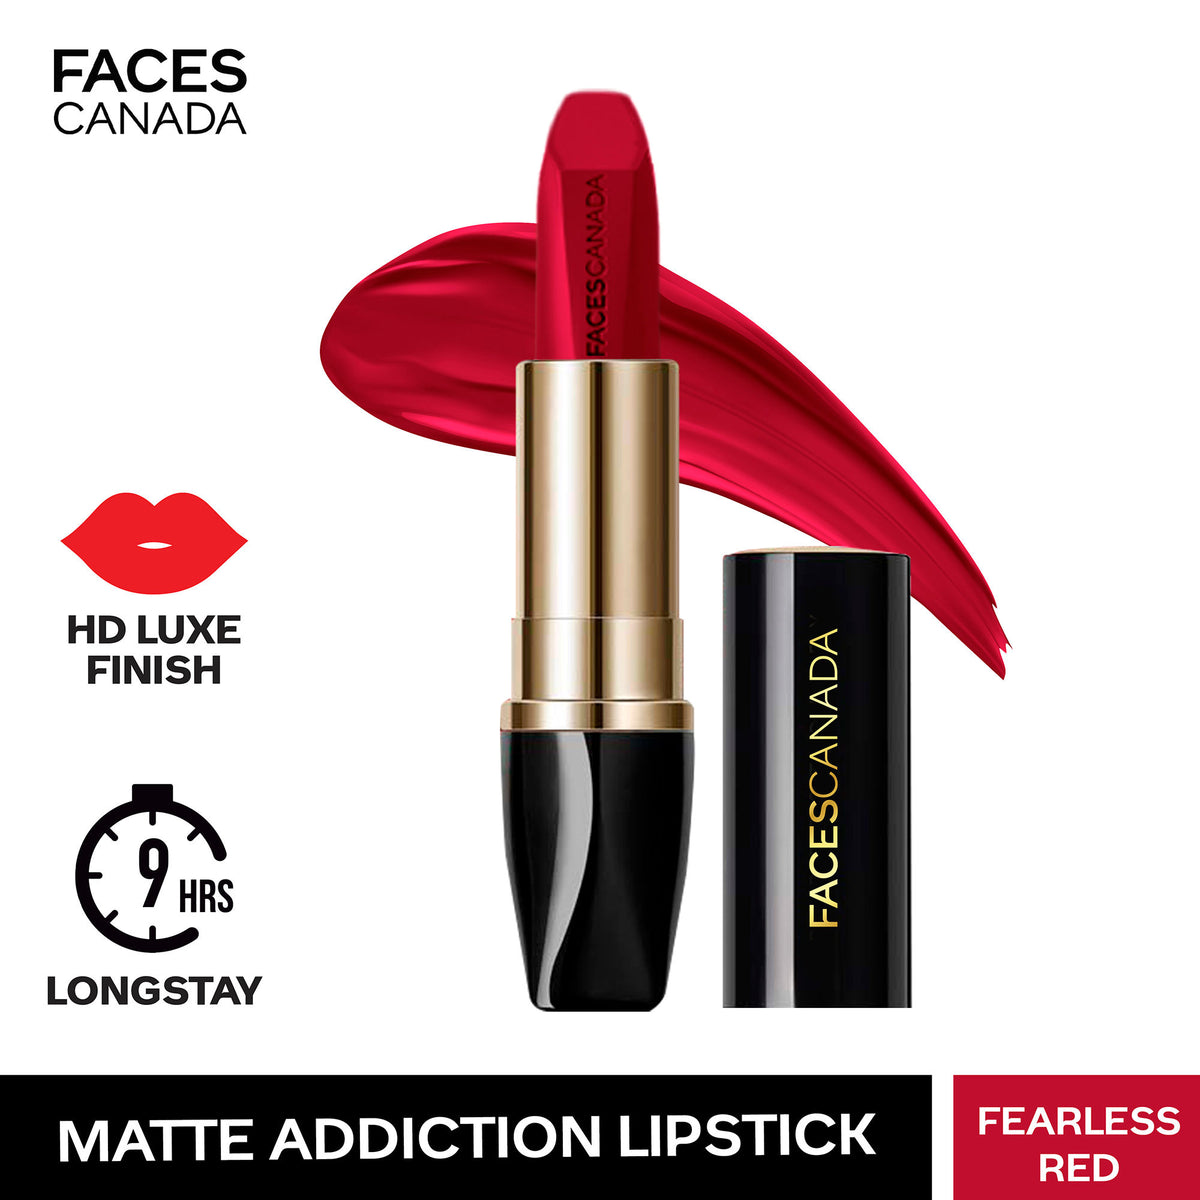 Faces Canada Matte Addiction Lipstick - Fearless Red 06 (3.7g) Faces Canada